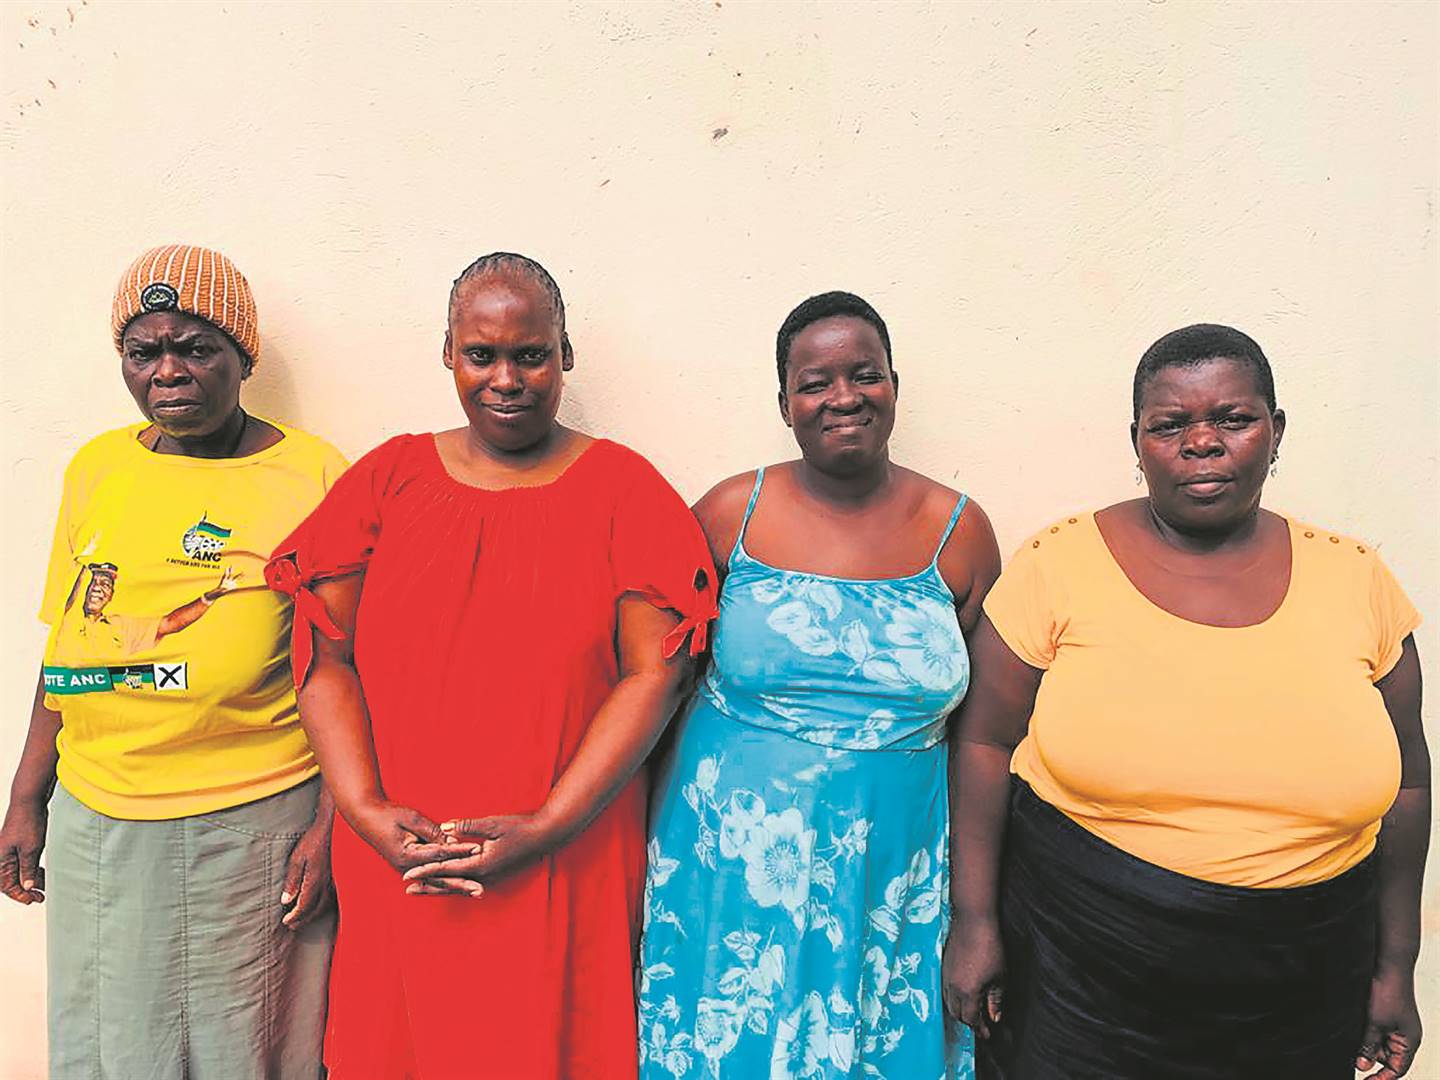 From left: Elisah Phalanndwa, Lukhwareni Betty, Tshilidzi Tshivhase and Alugumi Mudzanani are trying to raise funds to appeal the sentencing of the CPF members who were bust for kidnapping and murder.